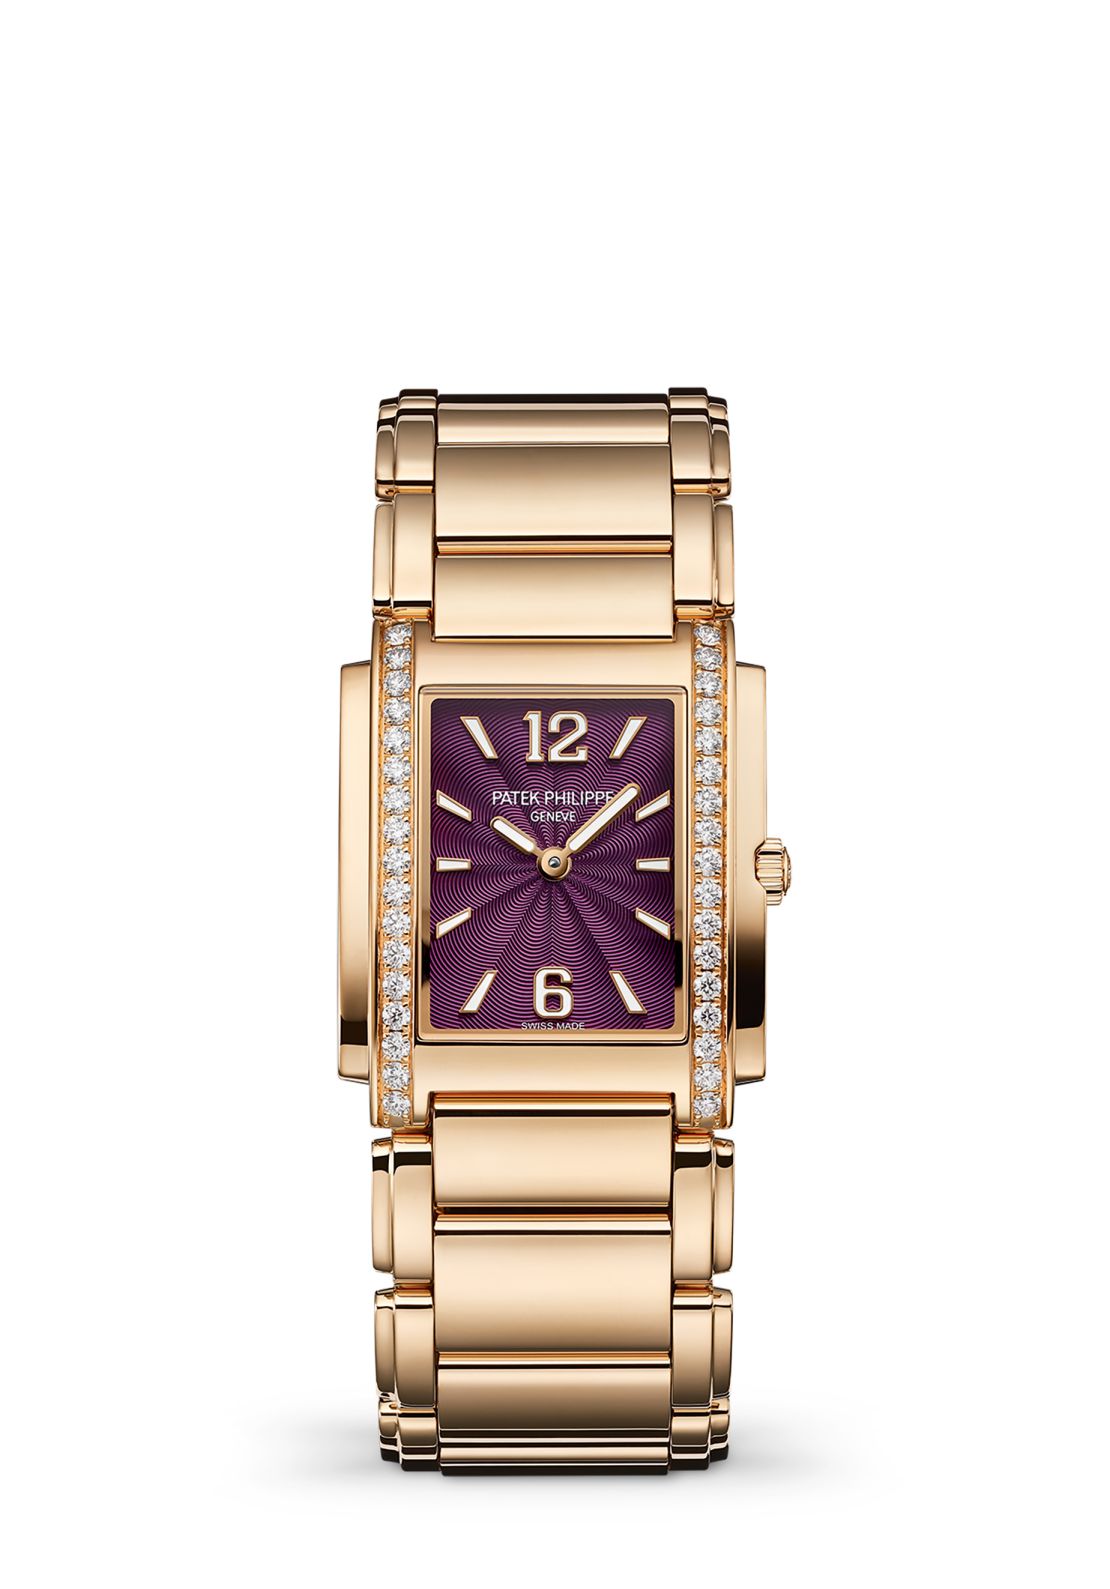 Patek Philippe Twenty-4 Ref. 4910/1201R-010 in rose gold with an embossed and lacquered purple dial, POA. Available now.